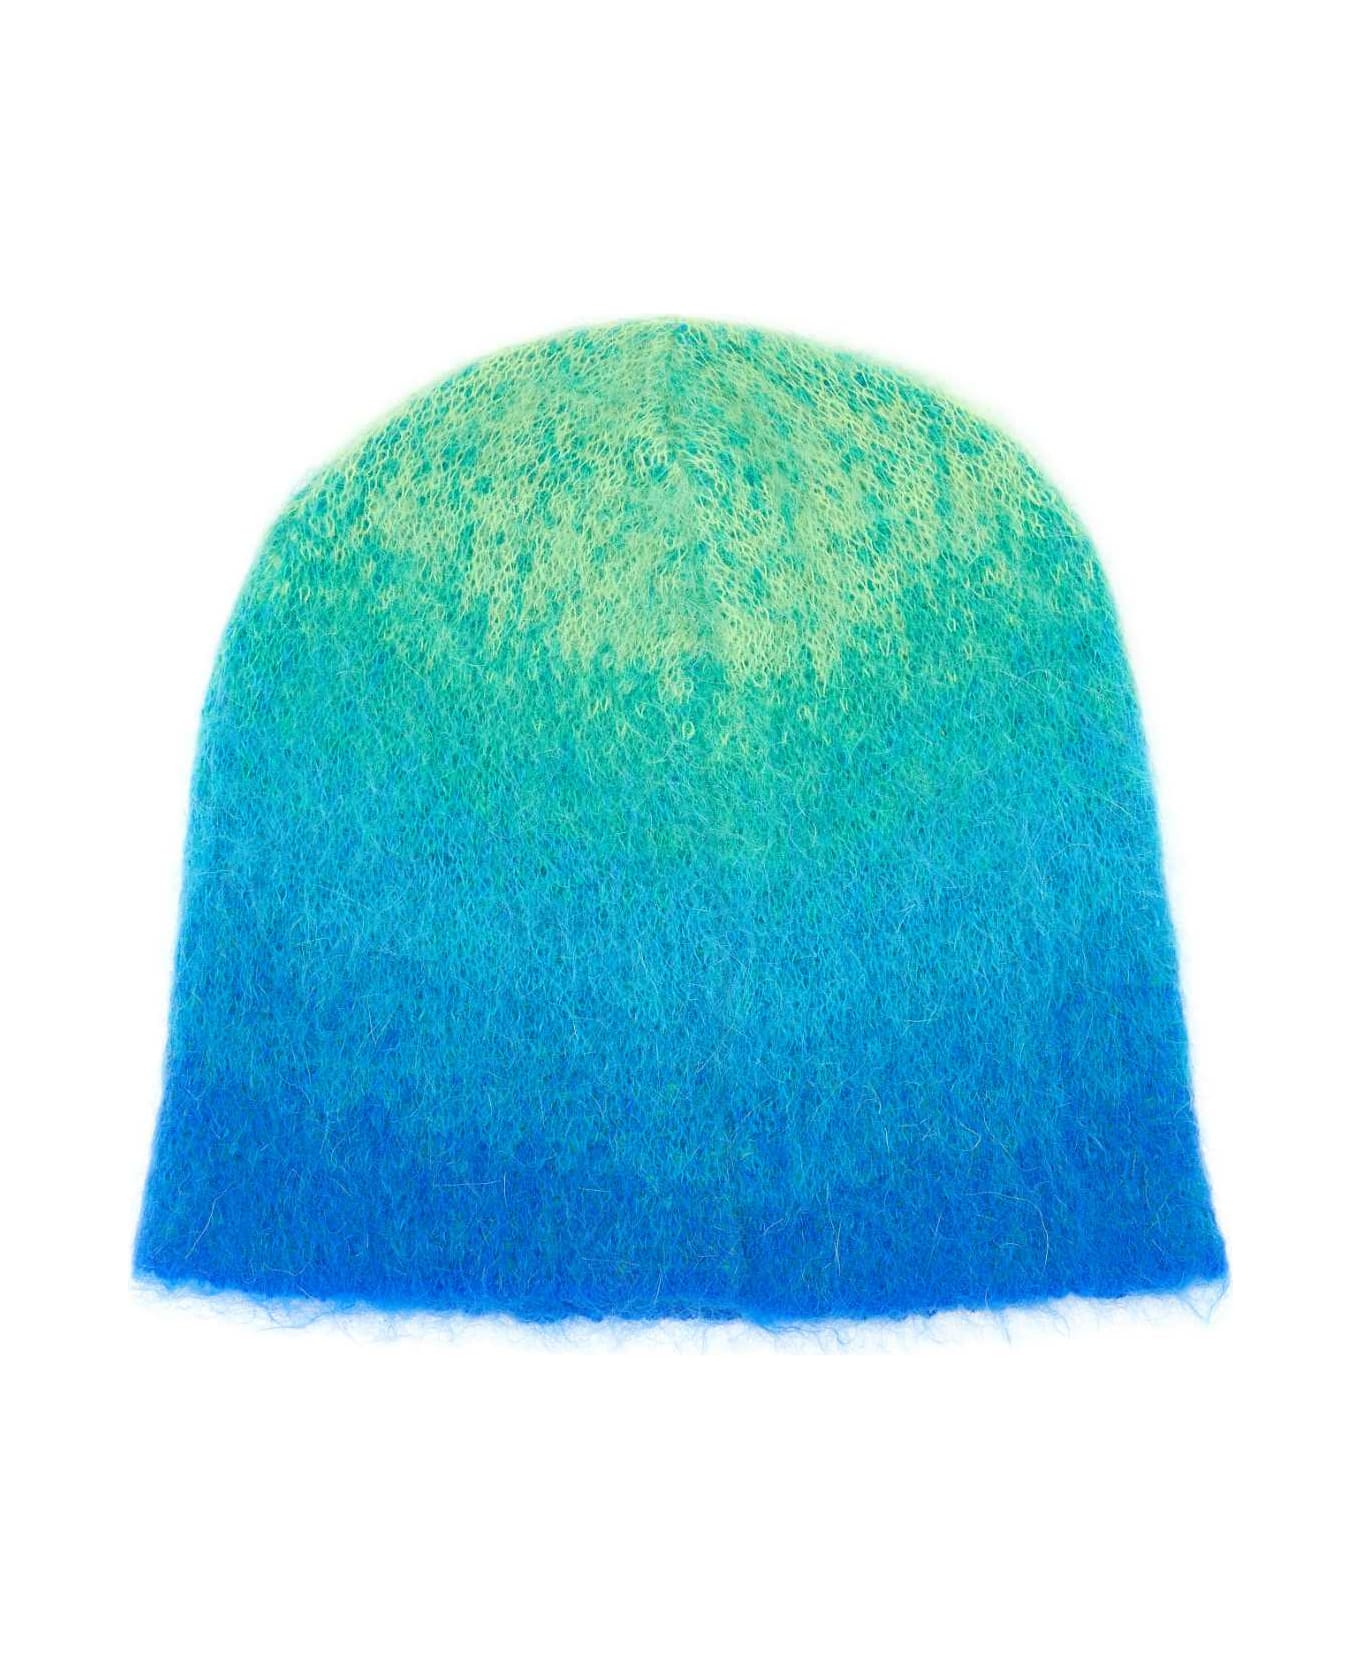 ERL Multicolor Mohair Blend Beanie Hat - BROWN